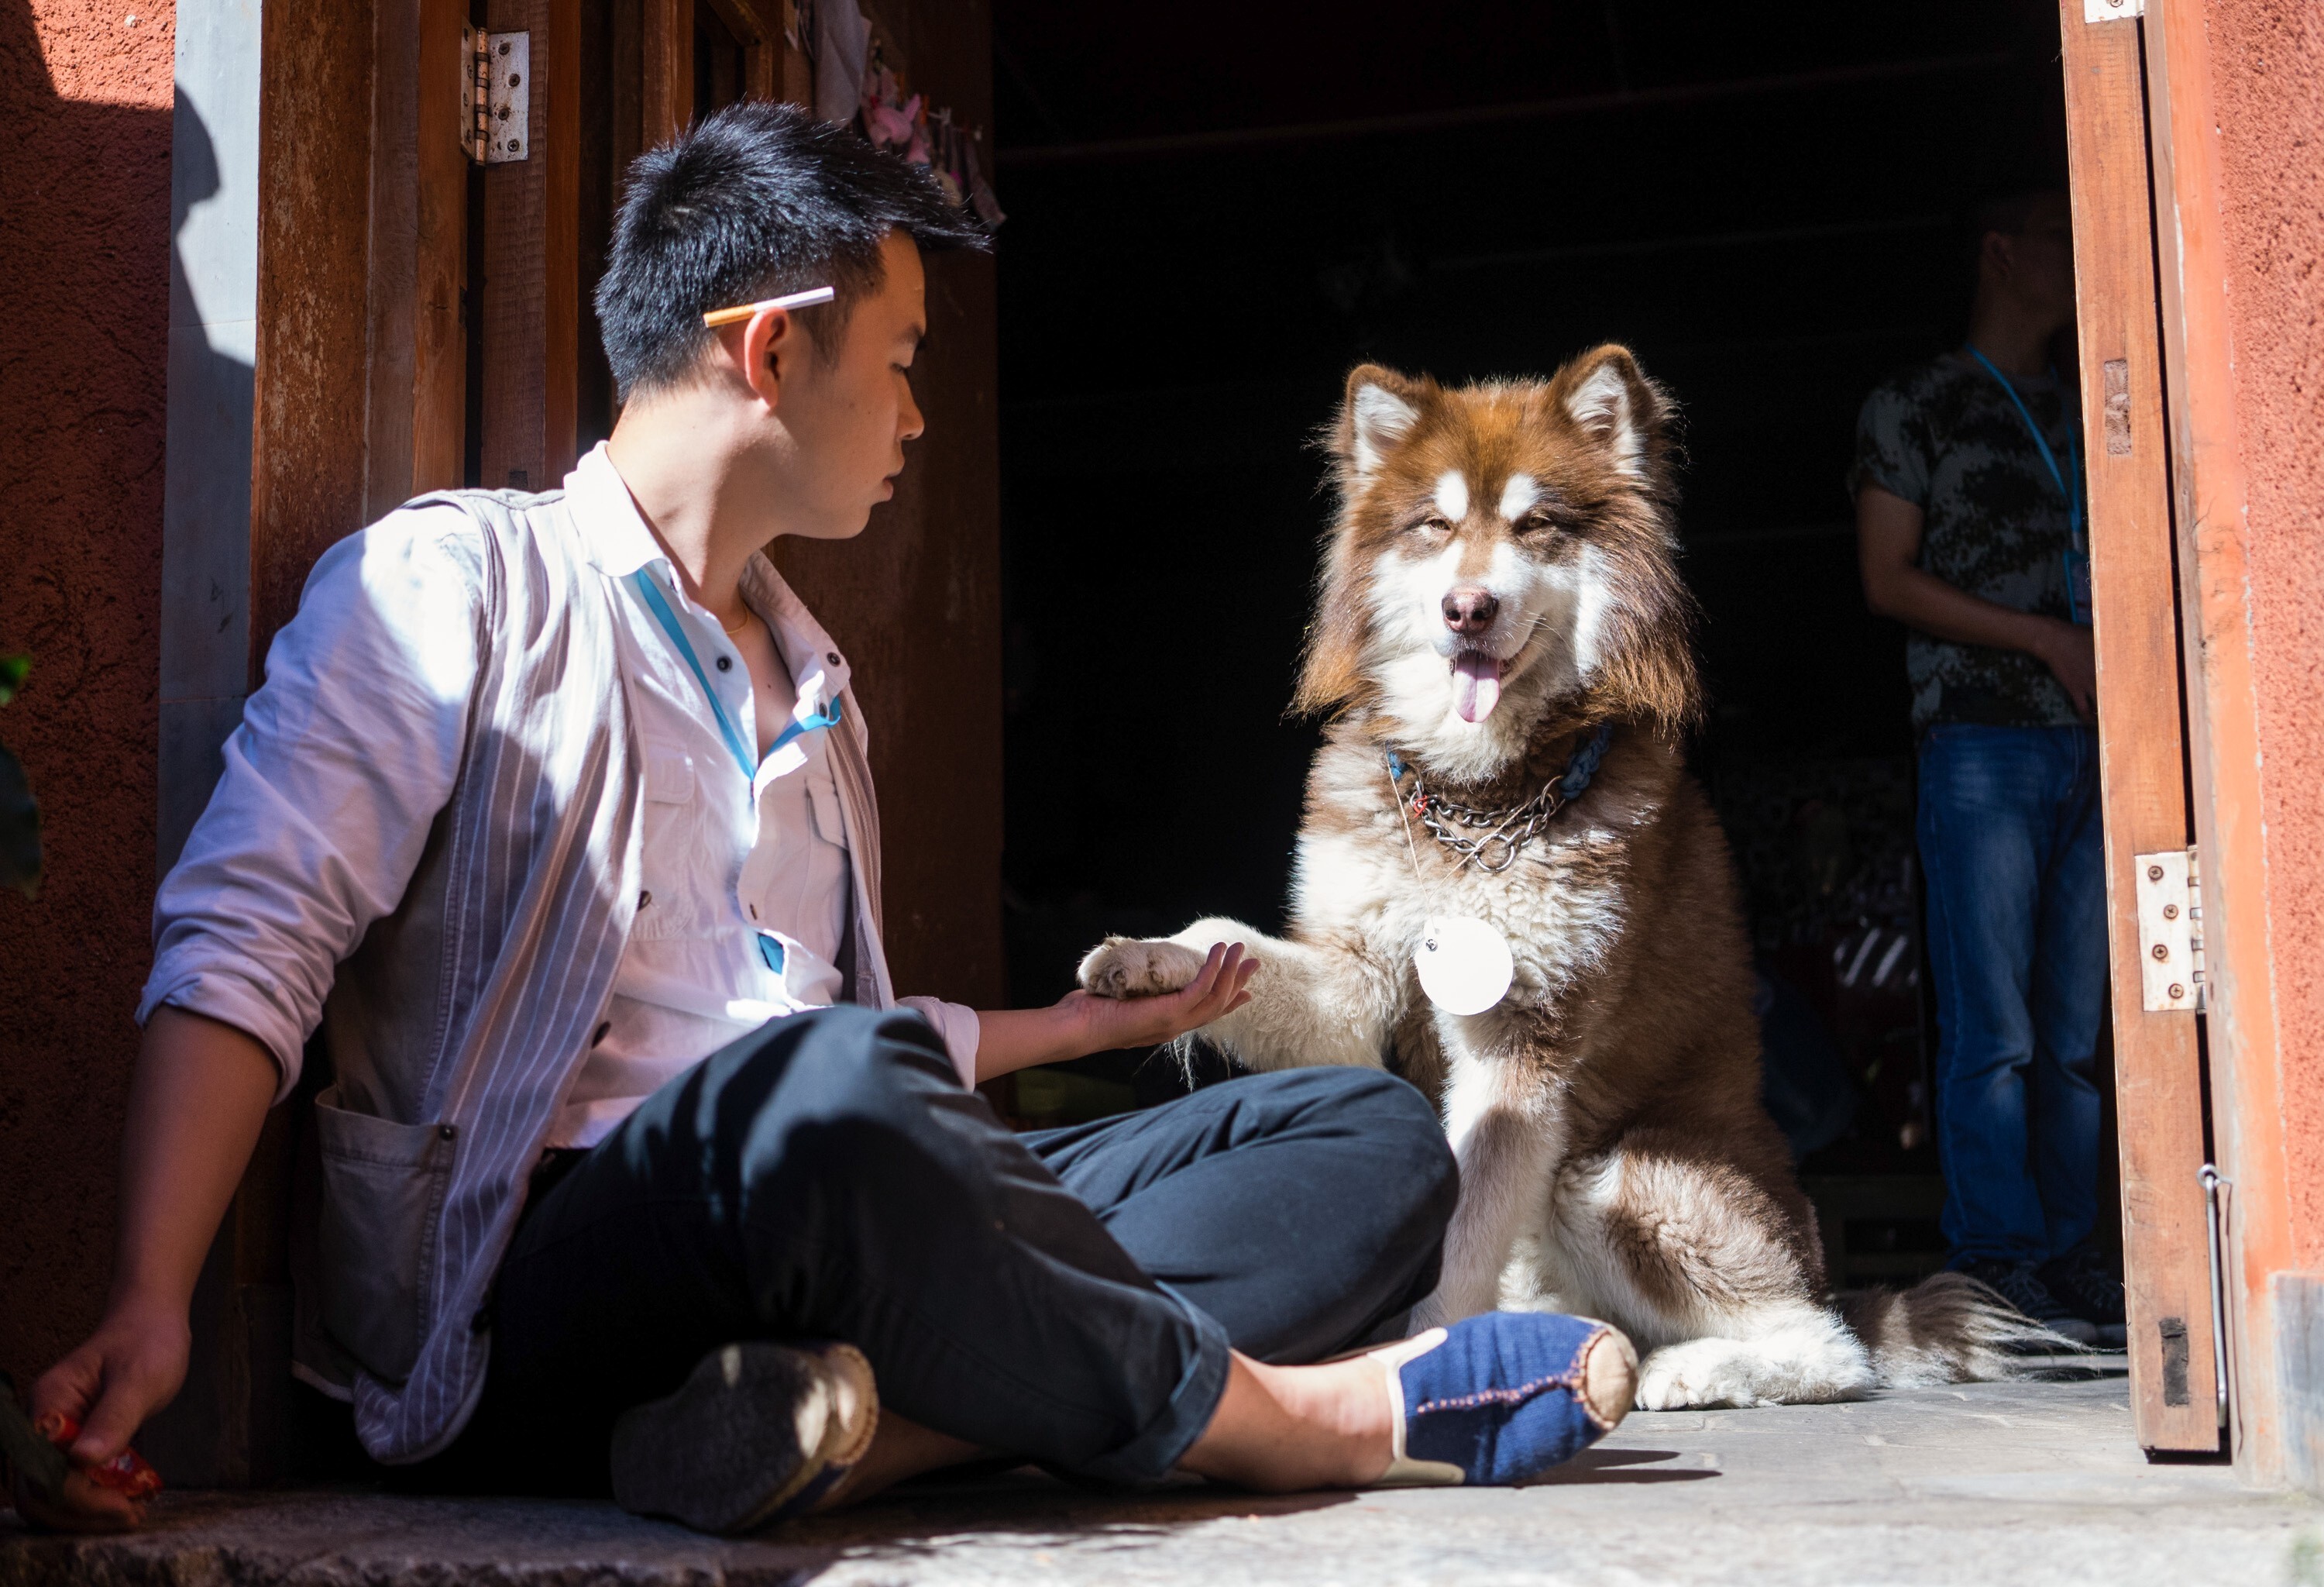 A man with an Alaskan malamute in Lijiang, Yunnan province. Some people are worried about the growing number of pets in Chinese cities. Photo: Getty Images